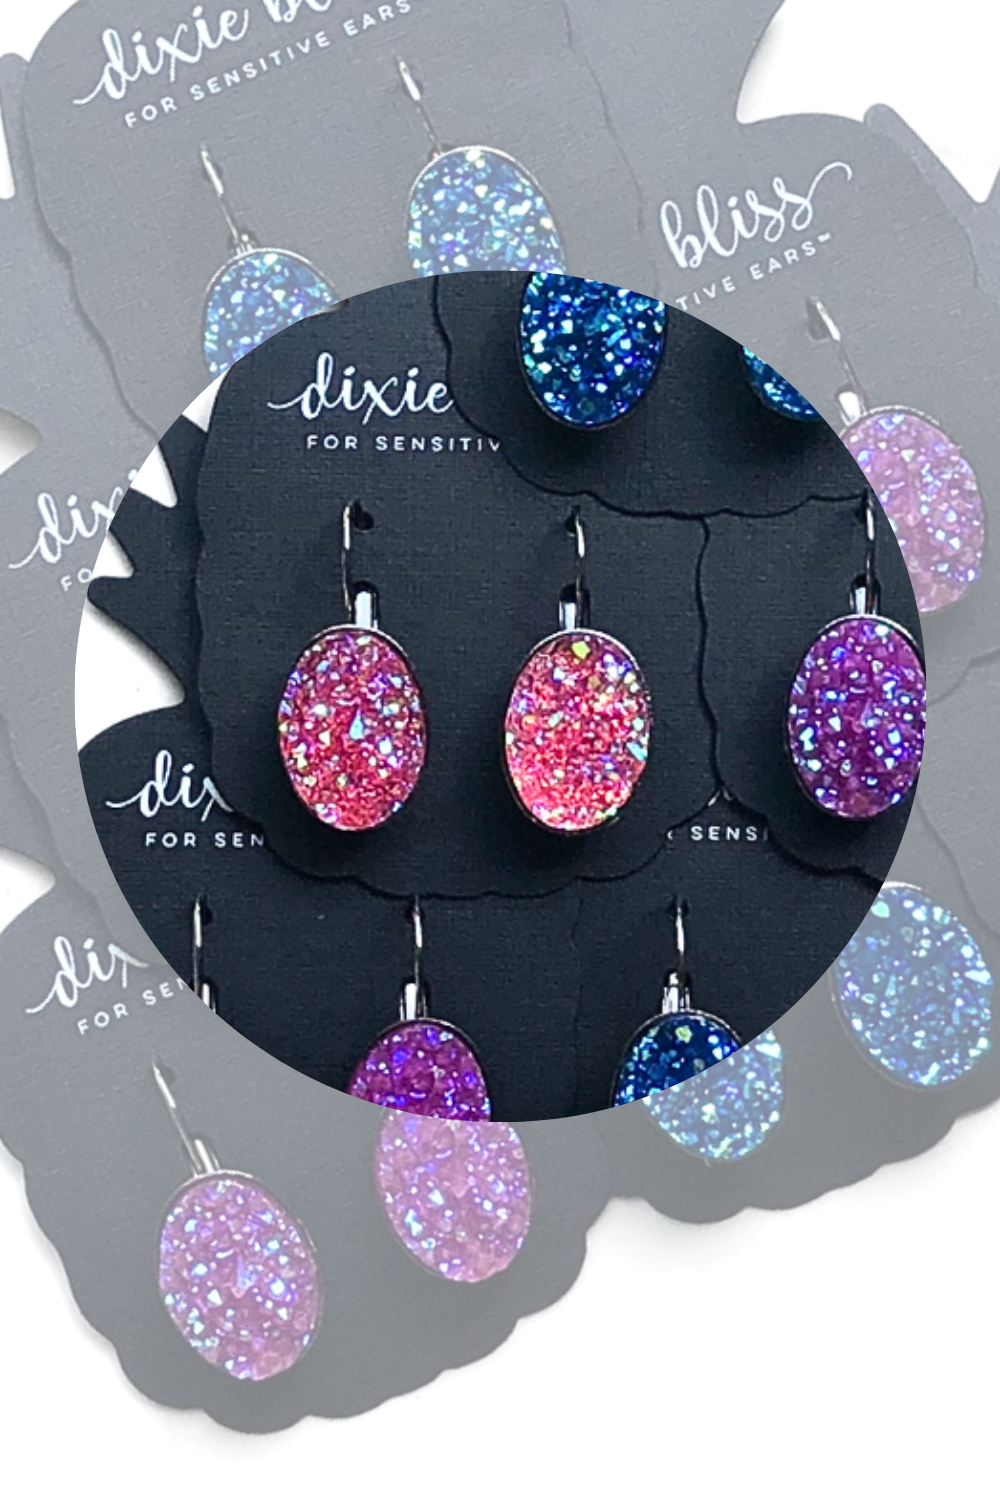 Iridescent Crystal Candy Pink | Dixie Bliss Earrings:  Vivid Lever Backs In Blue, Pink, and Purple. All Hypoallergenic made in the USA woman-owned company druzy shiny diamond-like sparkle and shine safe & made for sensitive ears